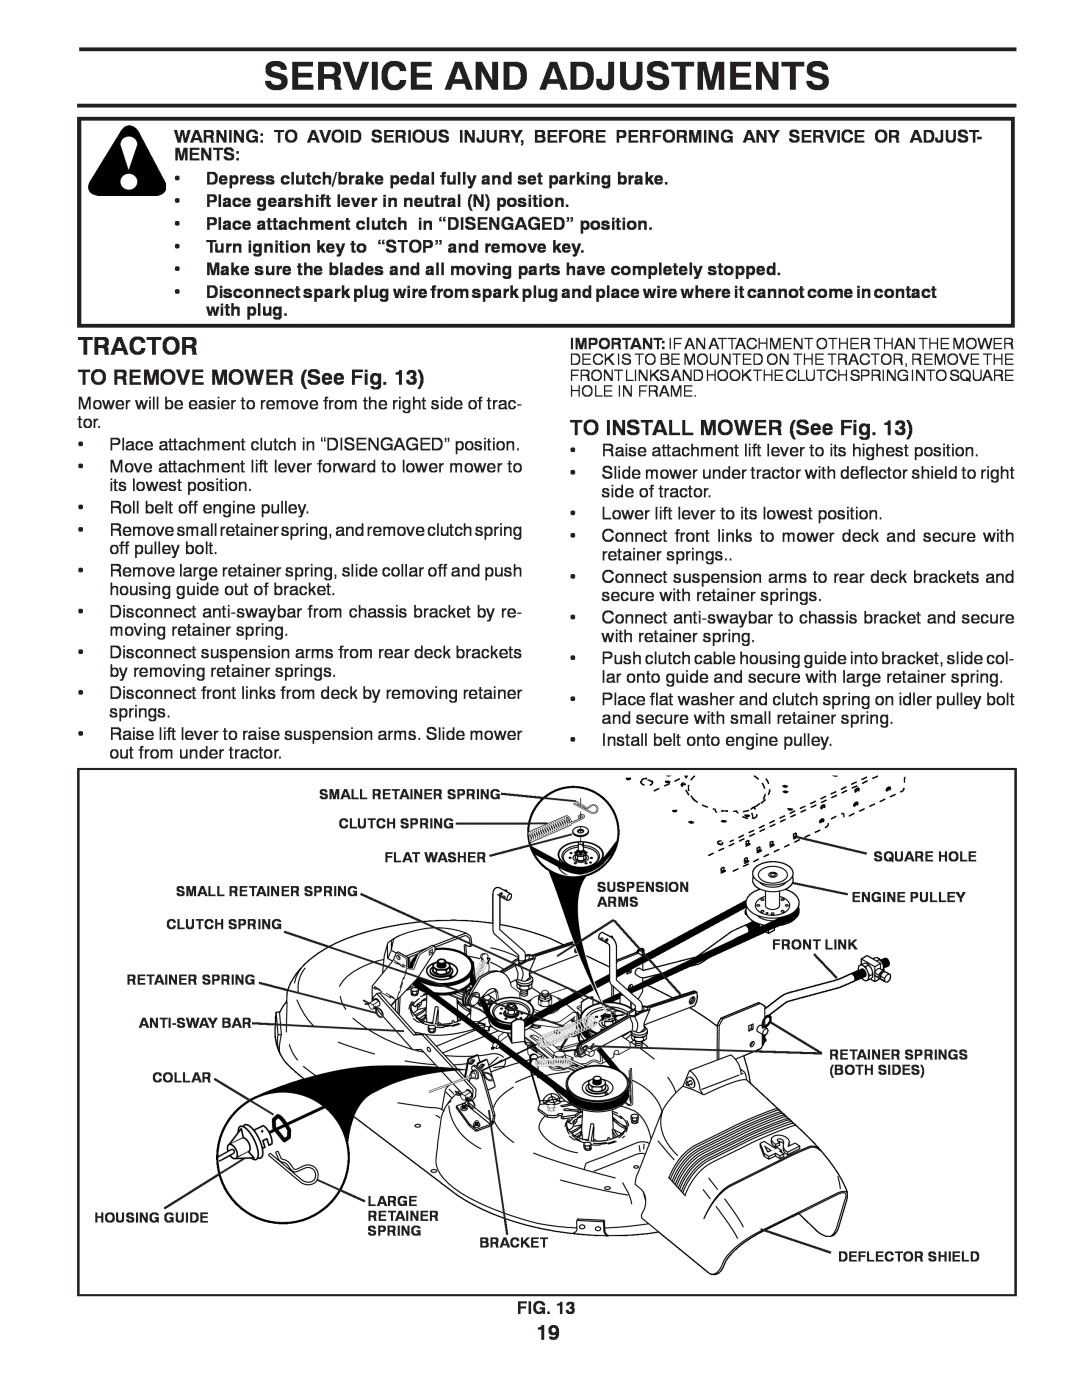 Poulan 96012006904 manual Service And Adjustments, TO REMOVE MOWER See Fig, TO INSTALL MOWER See Fig, Tractor 